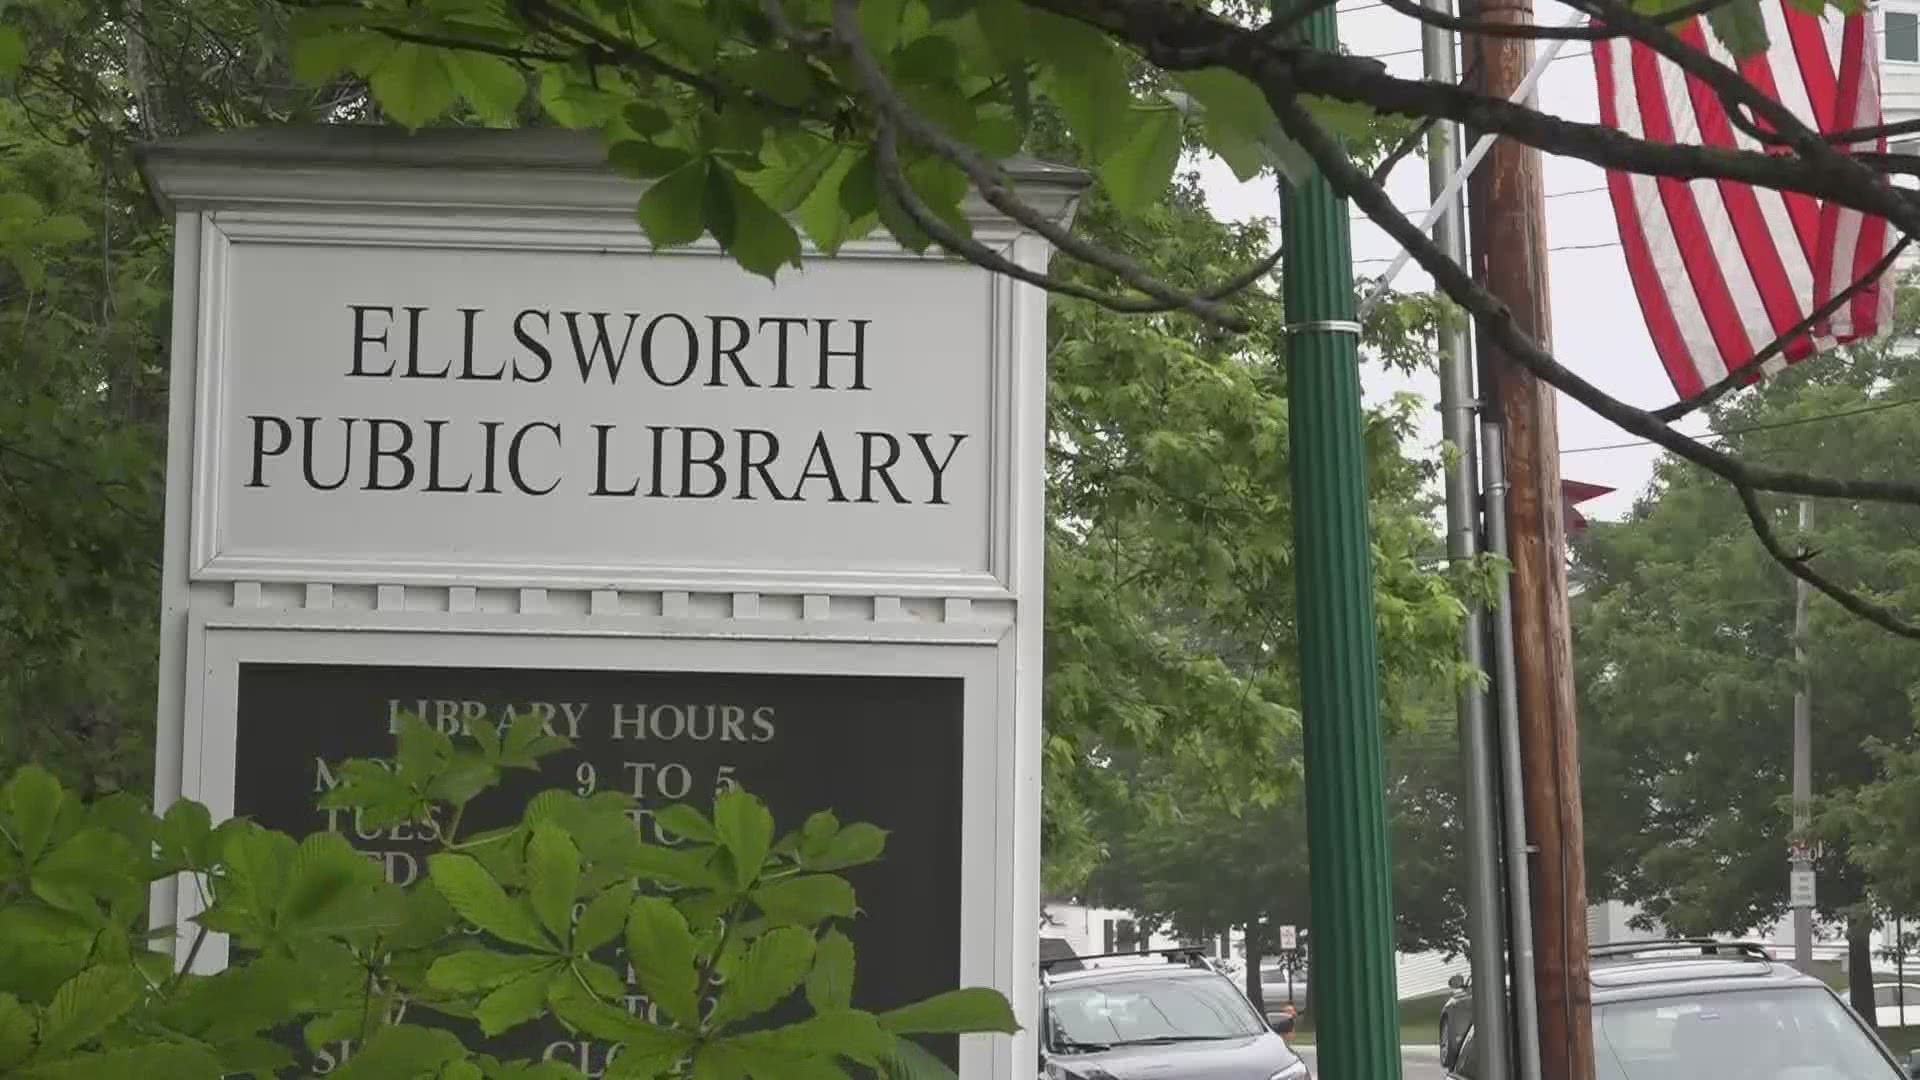 Ellsworth city councilors are meeting Thursday, July 9 to discuss a major proposed budget cut to the Ellsworth Public Library.